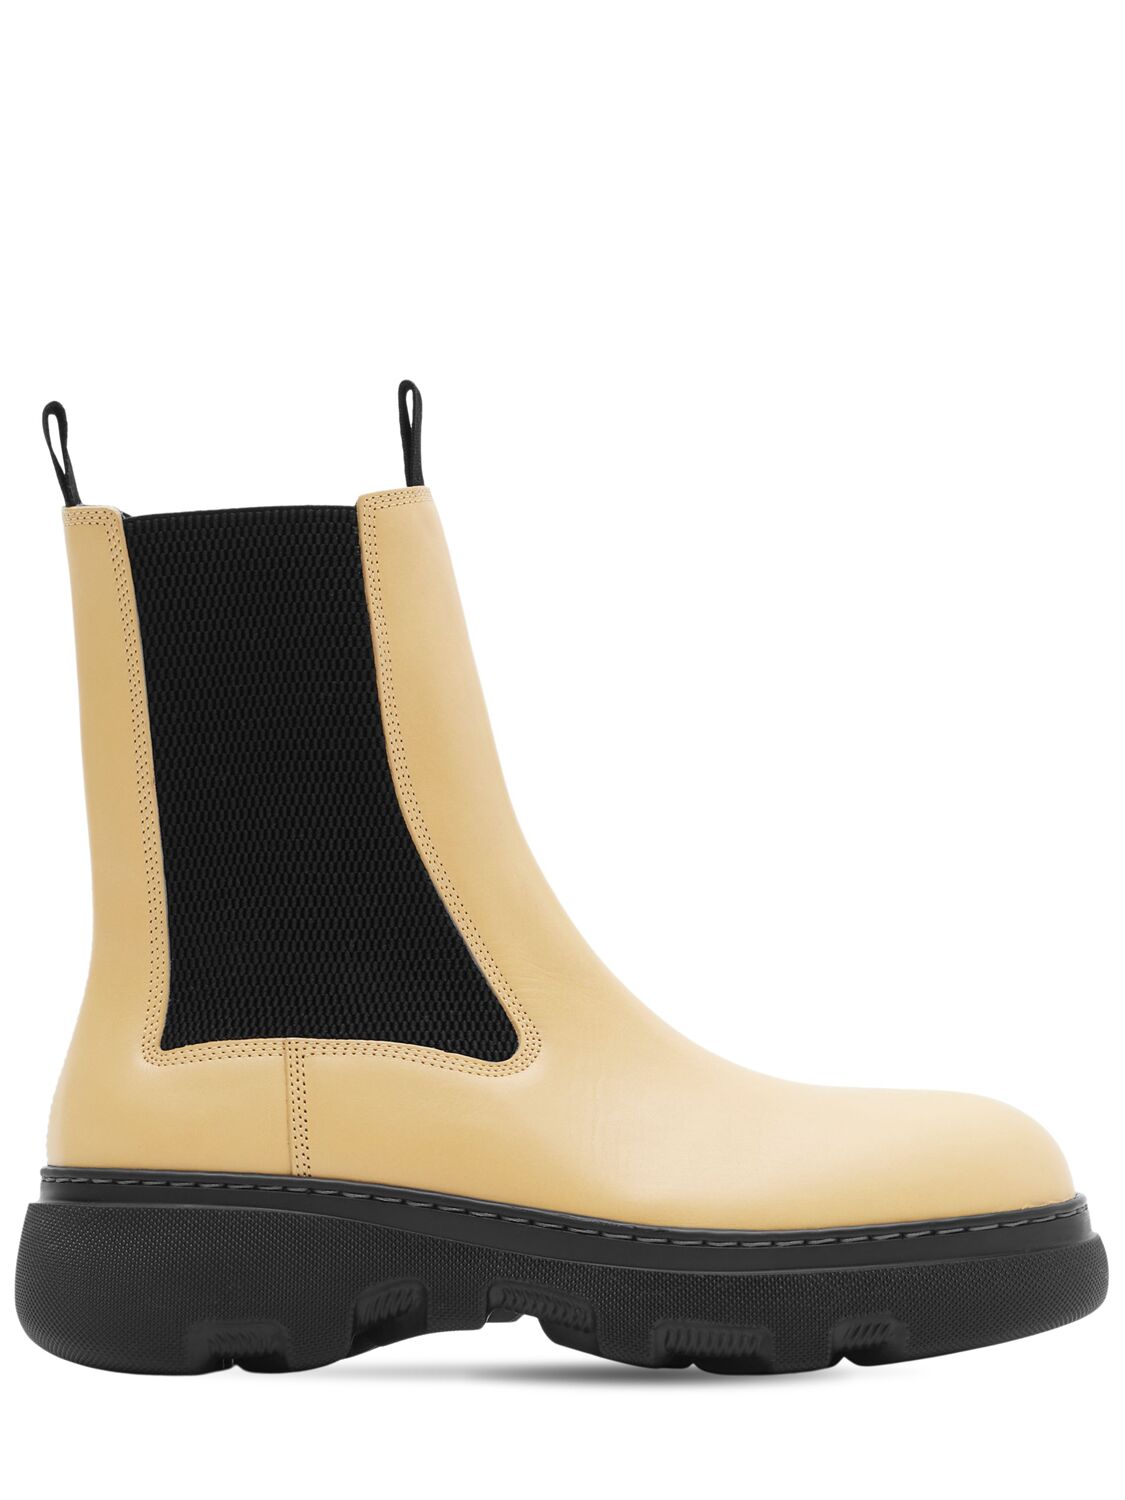 Image of Lf Creeper Leather Chelsea Boots